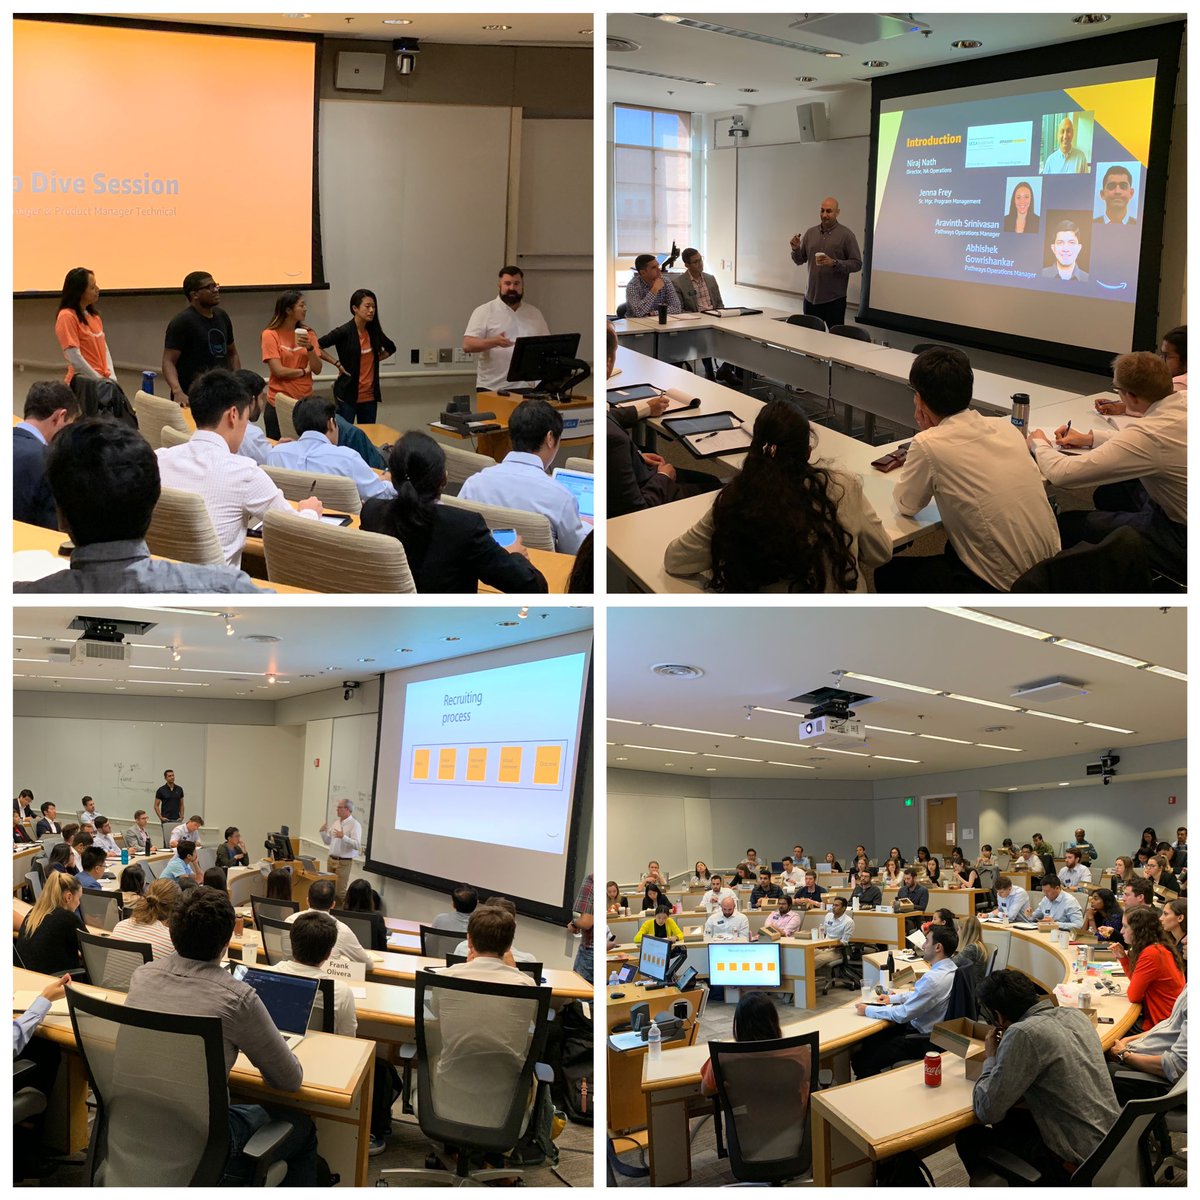 Bunch of @uclaanderson Amazonians invaded campus for a company presentation, reception, breakfast, several Deep Dive Sessions, interview workshop and thanks for sponsoring this week’s Anderson Afternoon!
#whyanderson #TechAtAnderson #leadershipprinciples